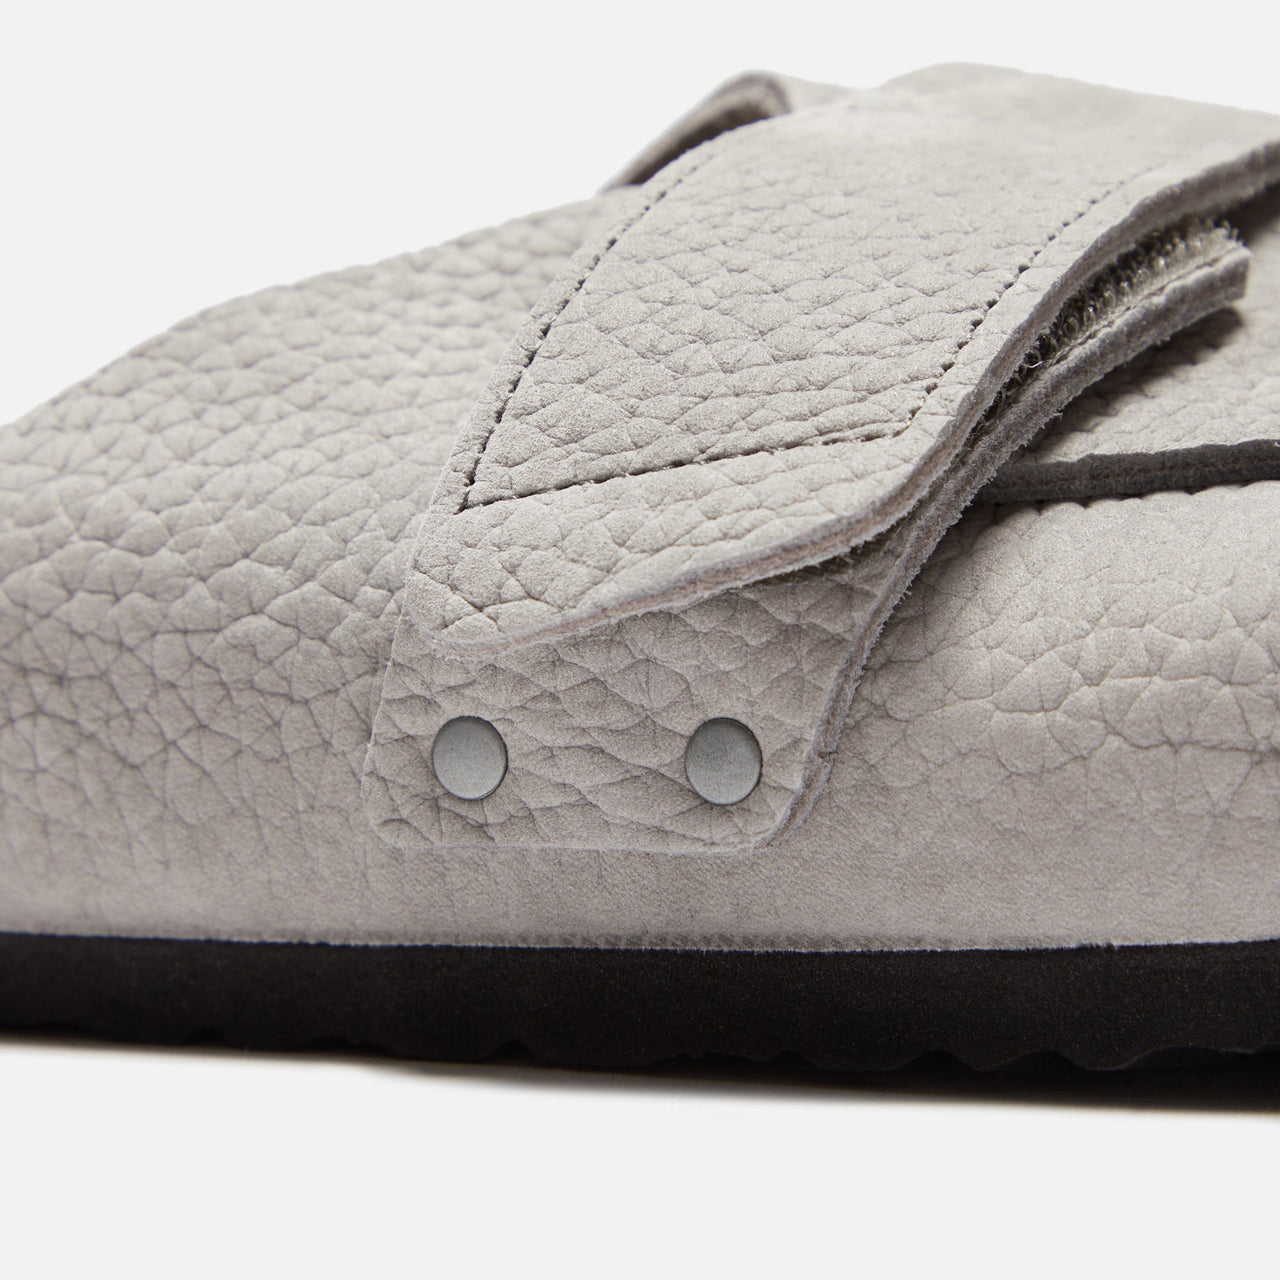 Top view of the Birkenstock Kyoto Nubuck Whale Grey sandal with durable and high-quality nubuck leather